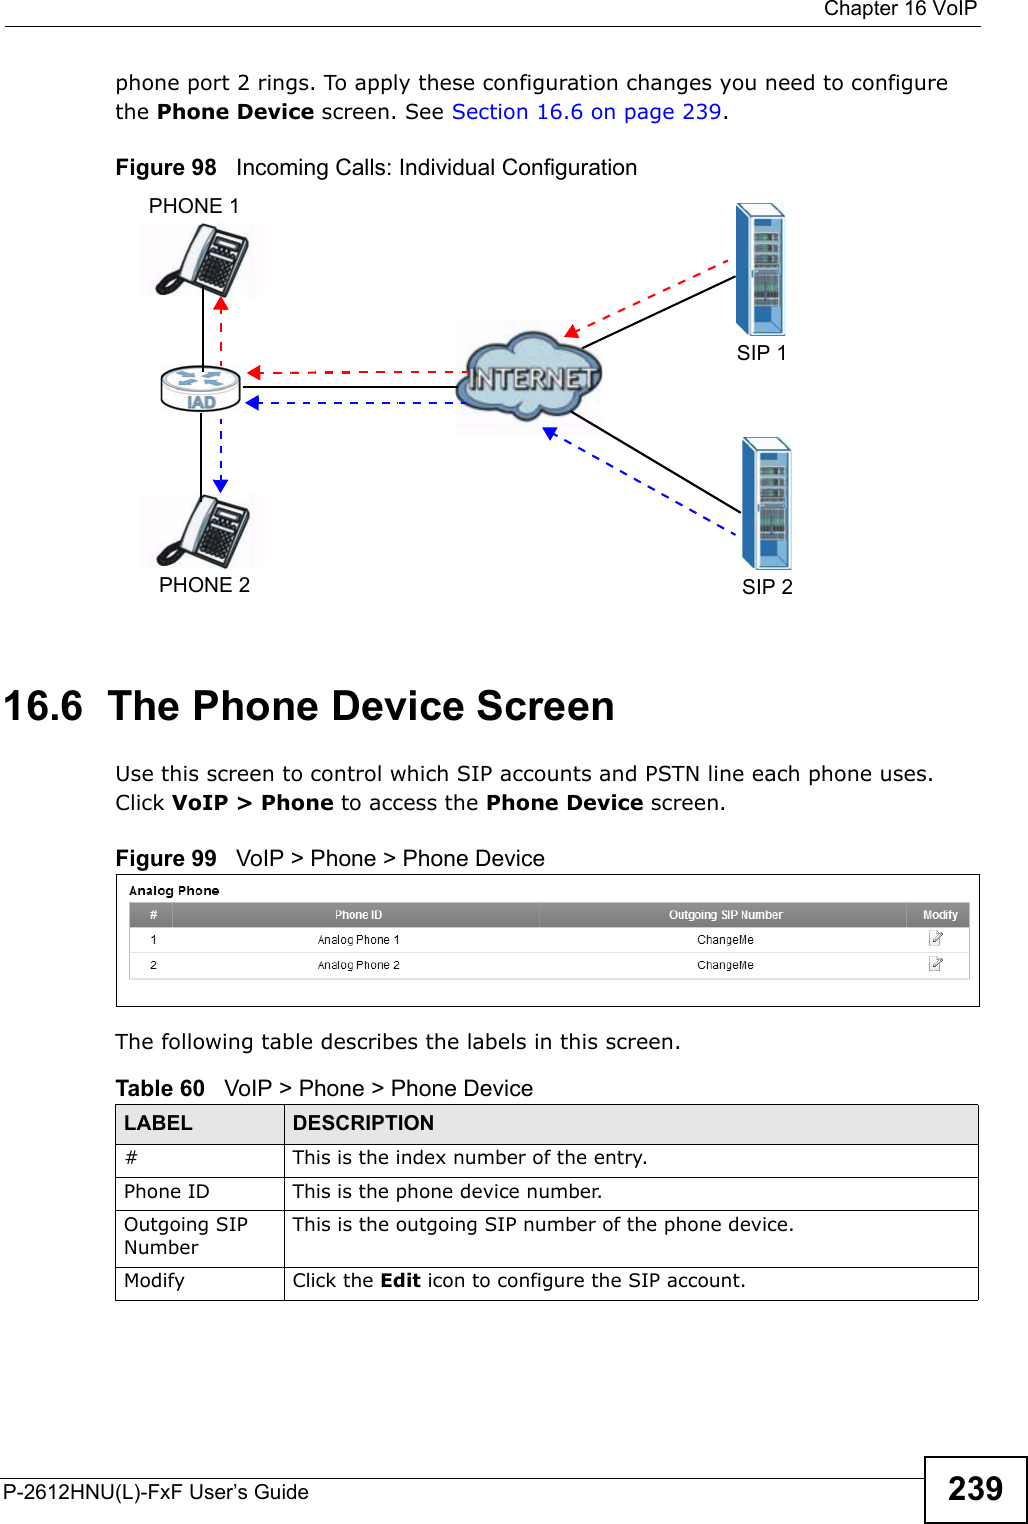  Chapter 16 VoIPP-2612HNU(L)-FxF User’s Guide 239phone port 2 rings. To apply these configuration changes you need to configure the Phone Device screen. See Section 16.6 on page 239.Figure 98   Incoming Calls: Individual Configuration16.6  The Phone Device Screen Use this screen to control which SIP accounts and PSTN line each phone uses. Click VoIP &gt; Phone to access the Phone Device screen.Figure 99   VoIP &gt; Phone &gt; Phone DeviceThe following table describes the labels in this screen.SIP 1SIP 2PHONE 1PHONE 2Table 60   VoIP &gt; Phone &gt; Phone DeviceLABEL DESCRIPTION# This is the index number of the entry.Phone ID This is the phone device number.Outgoing SIP NumberThis is the outgoing SIP number of the phone device.Modify Click the Edit icon to configure the SIP account.